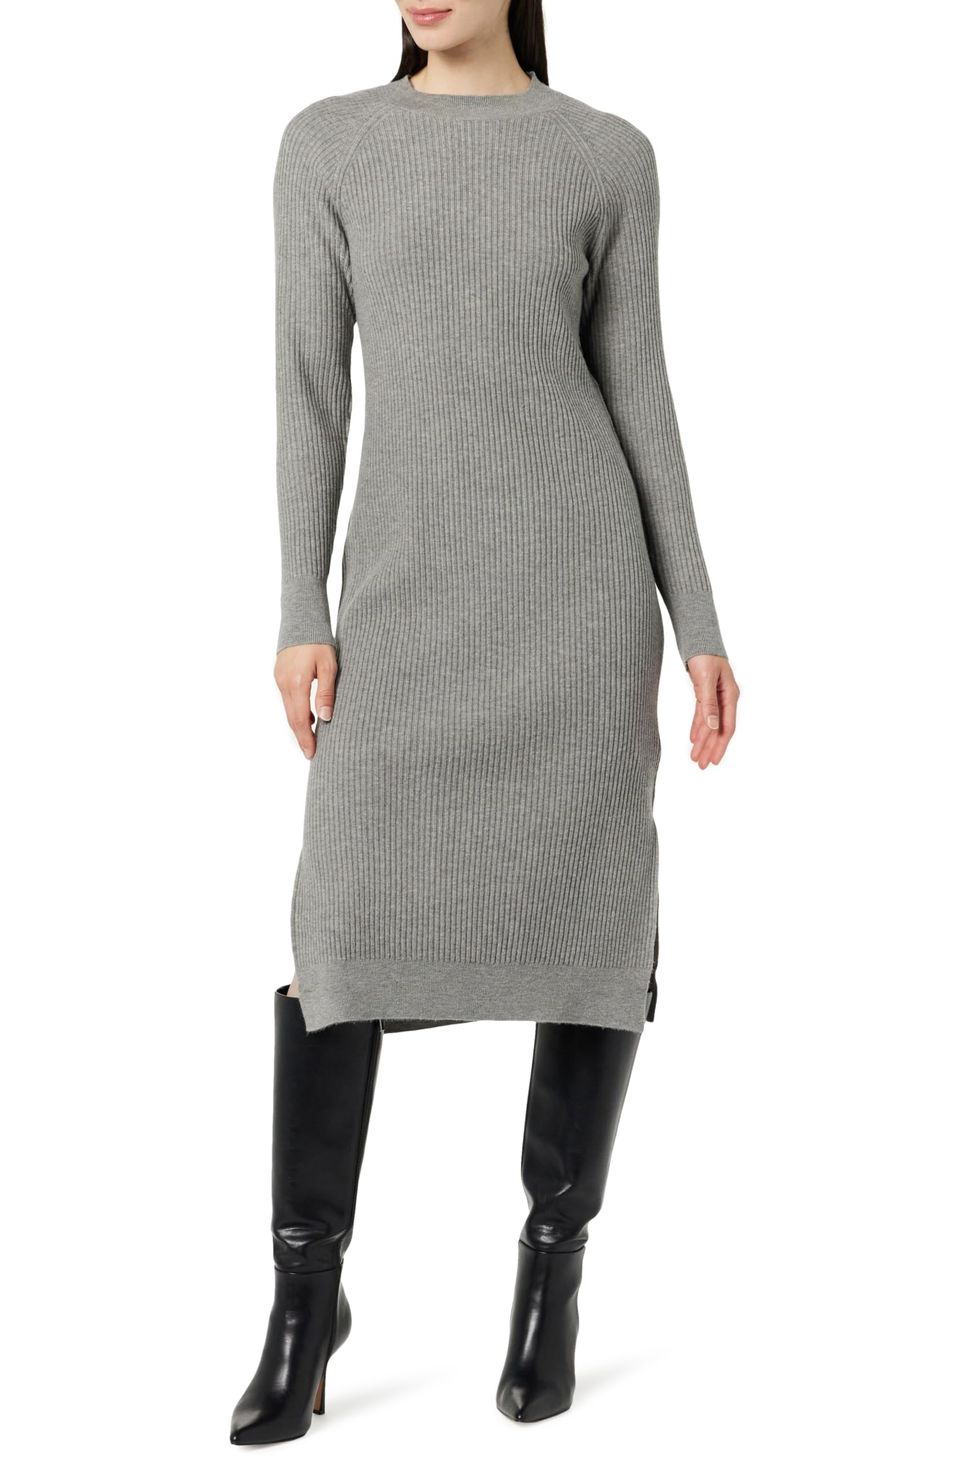 7 Stunning Winter Dresses For Women that You must have in Your